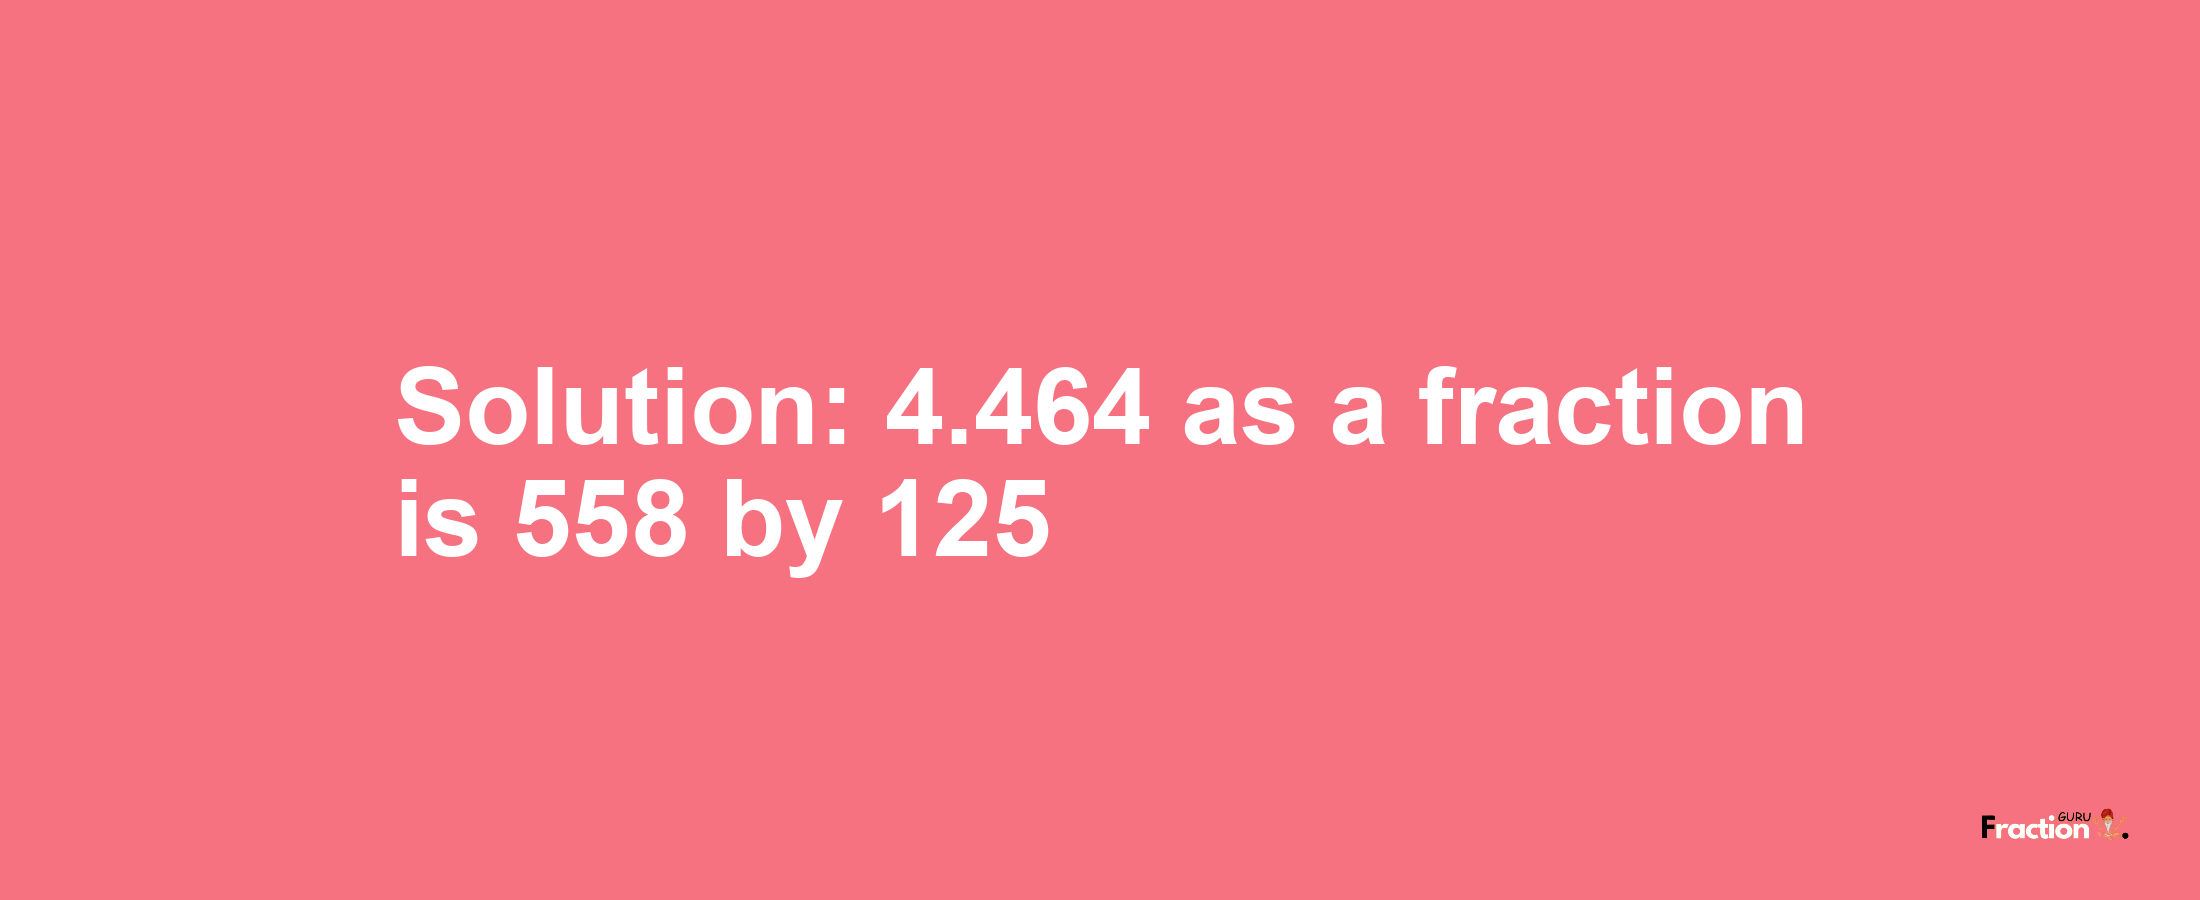 Solution:4.464 as a fraction is 558/125